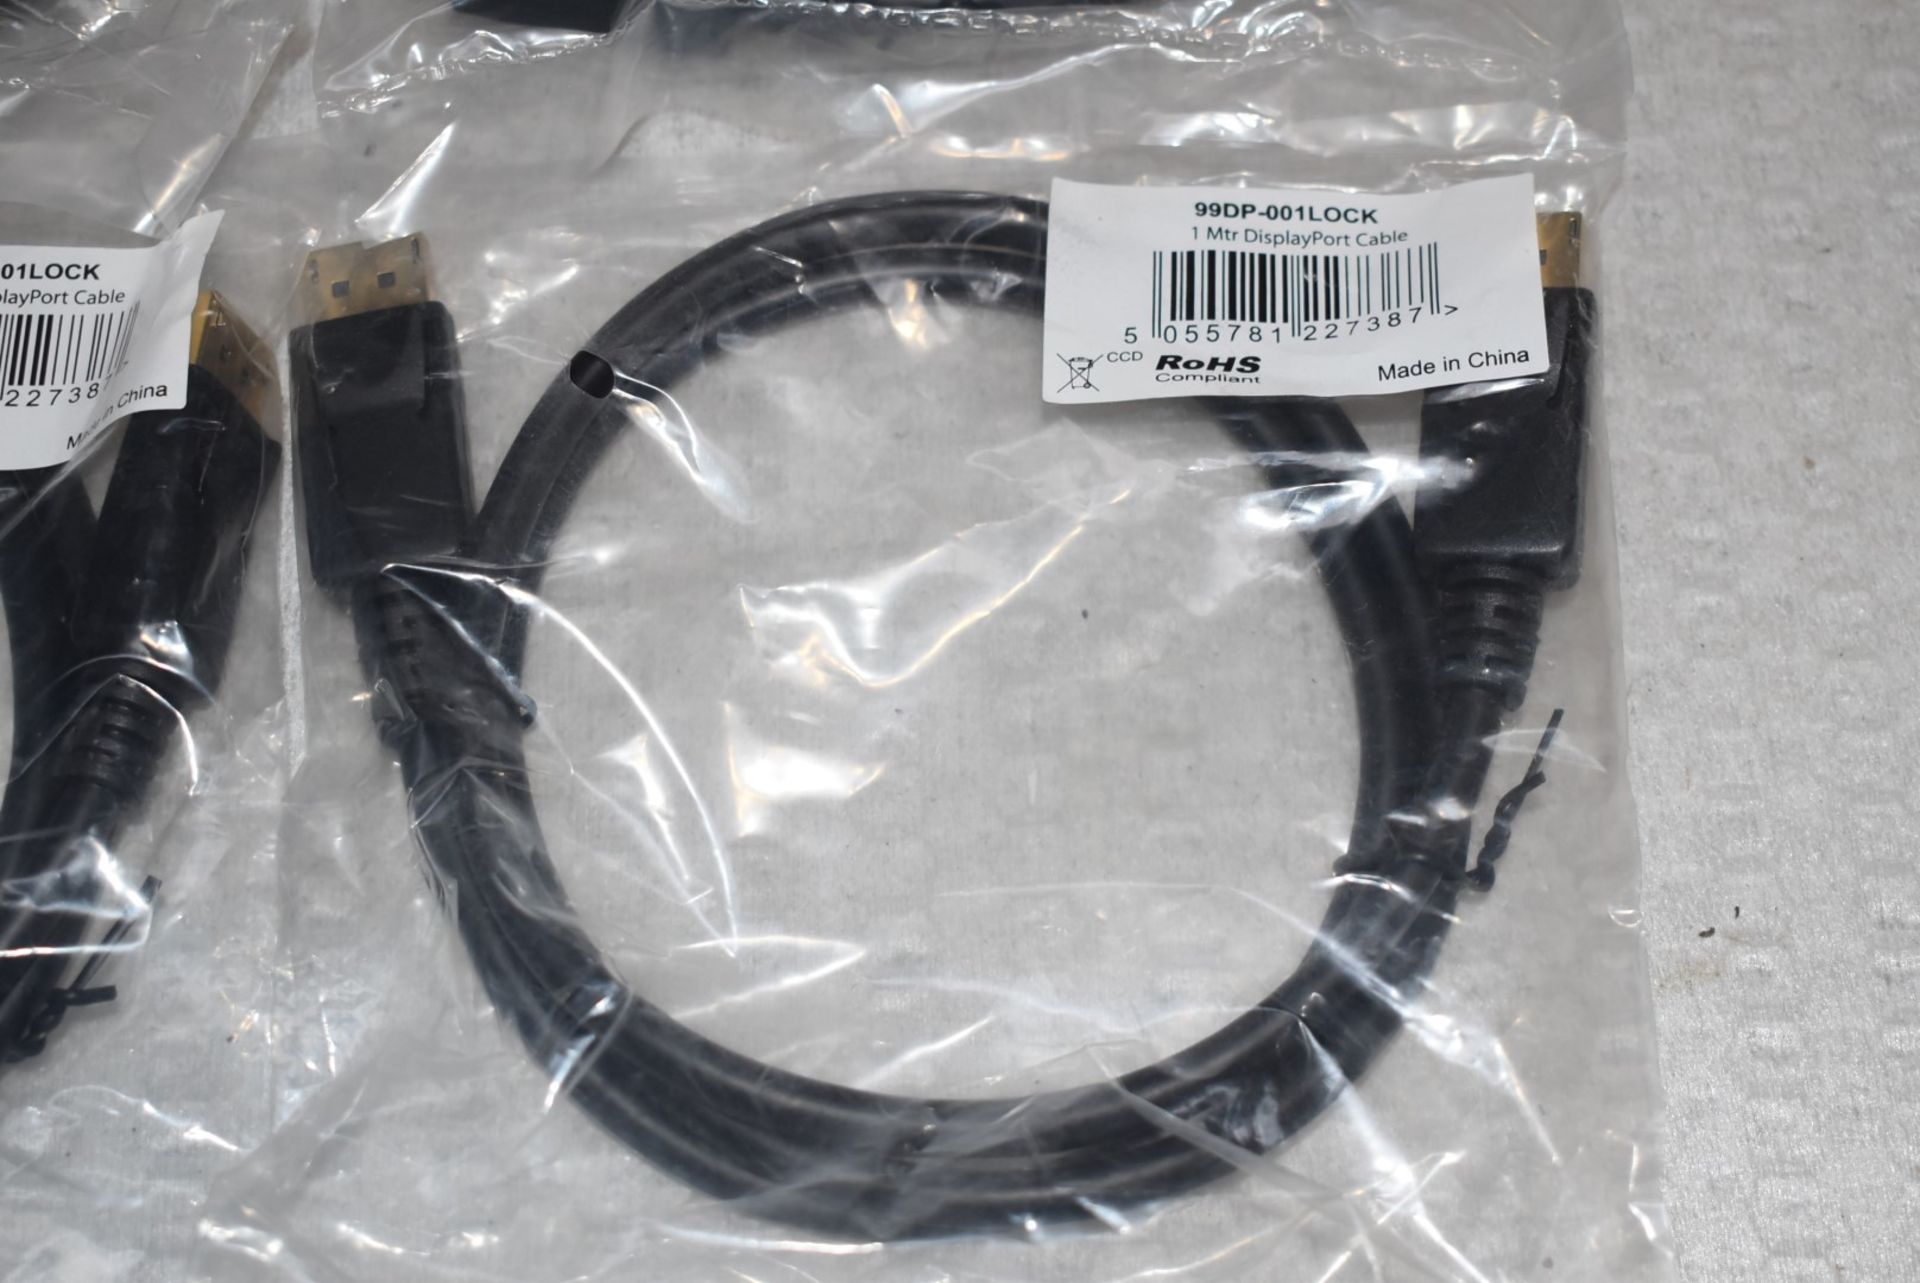 4 x DisplayPort 1 Meter Monitor Cables - New in Packets - Image 7 of 7